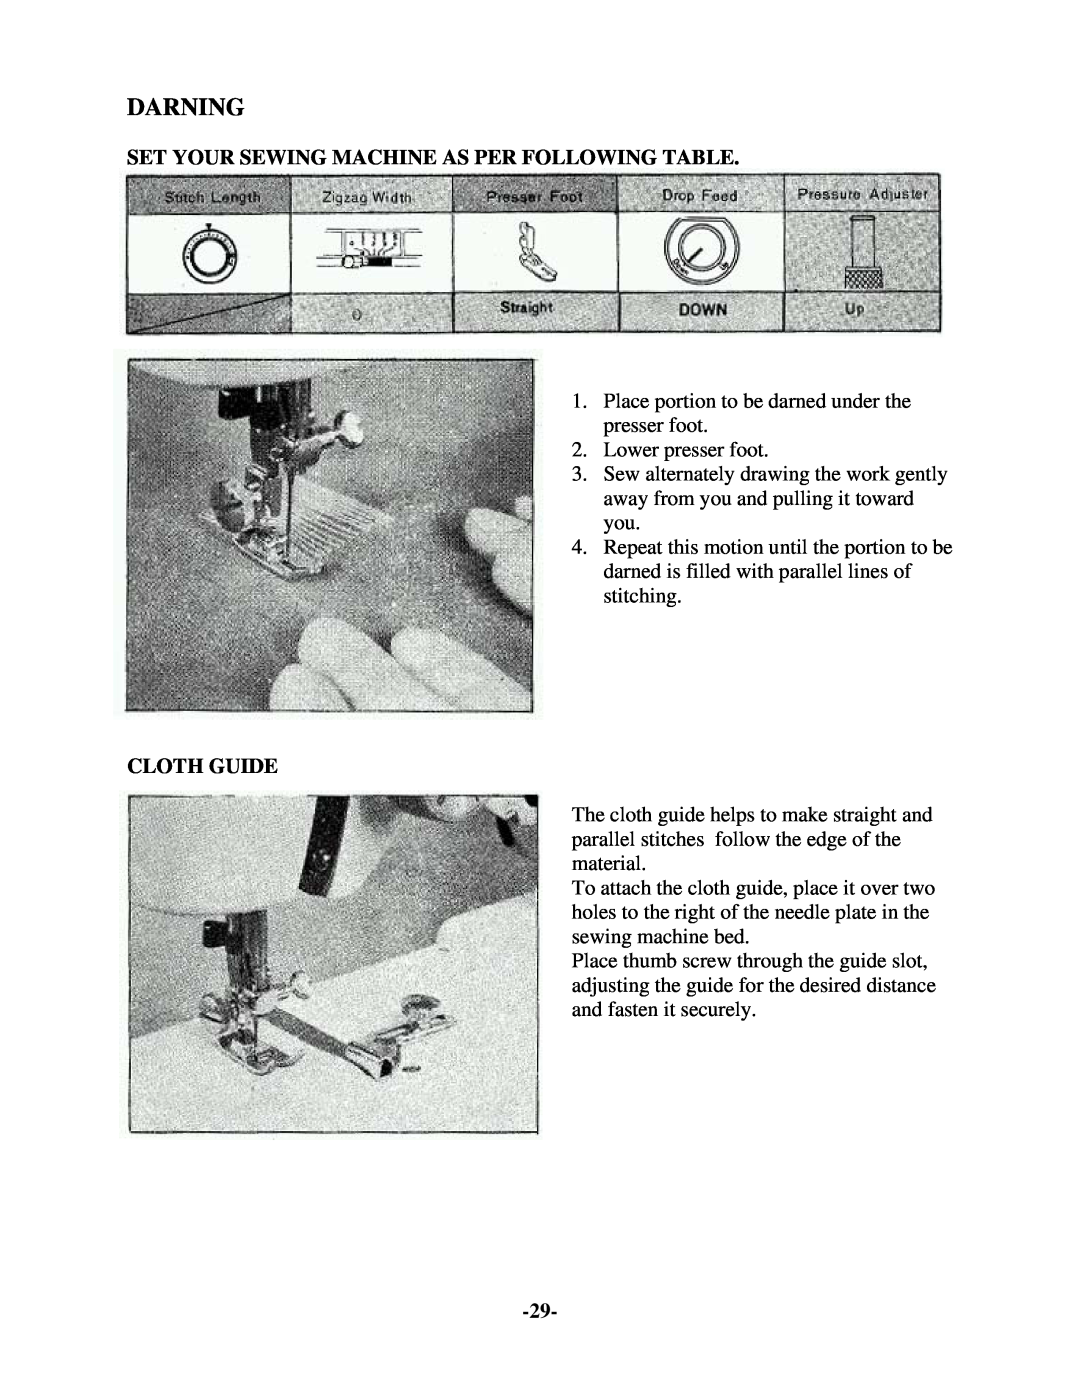 Brother 681B-UG manual Darning, Set Your Sewing Machine As Per Following Table, Cloth Guide 